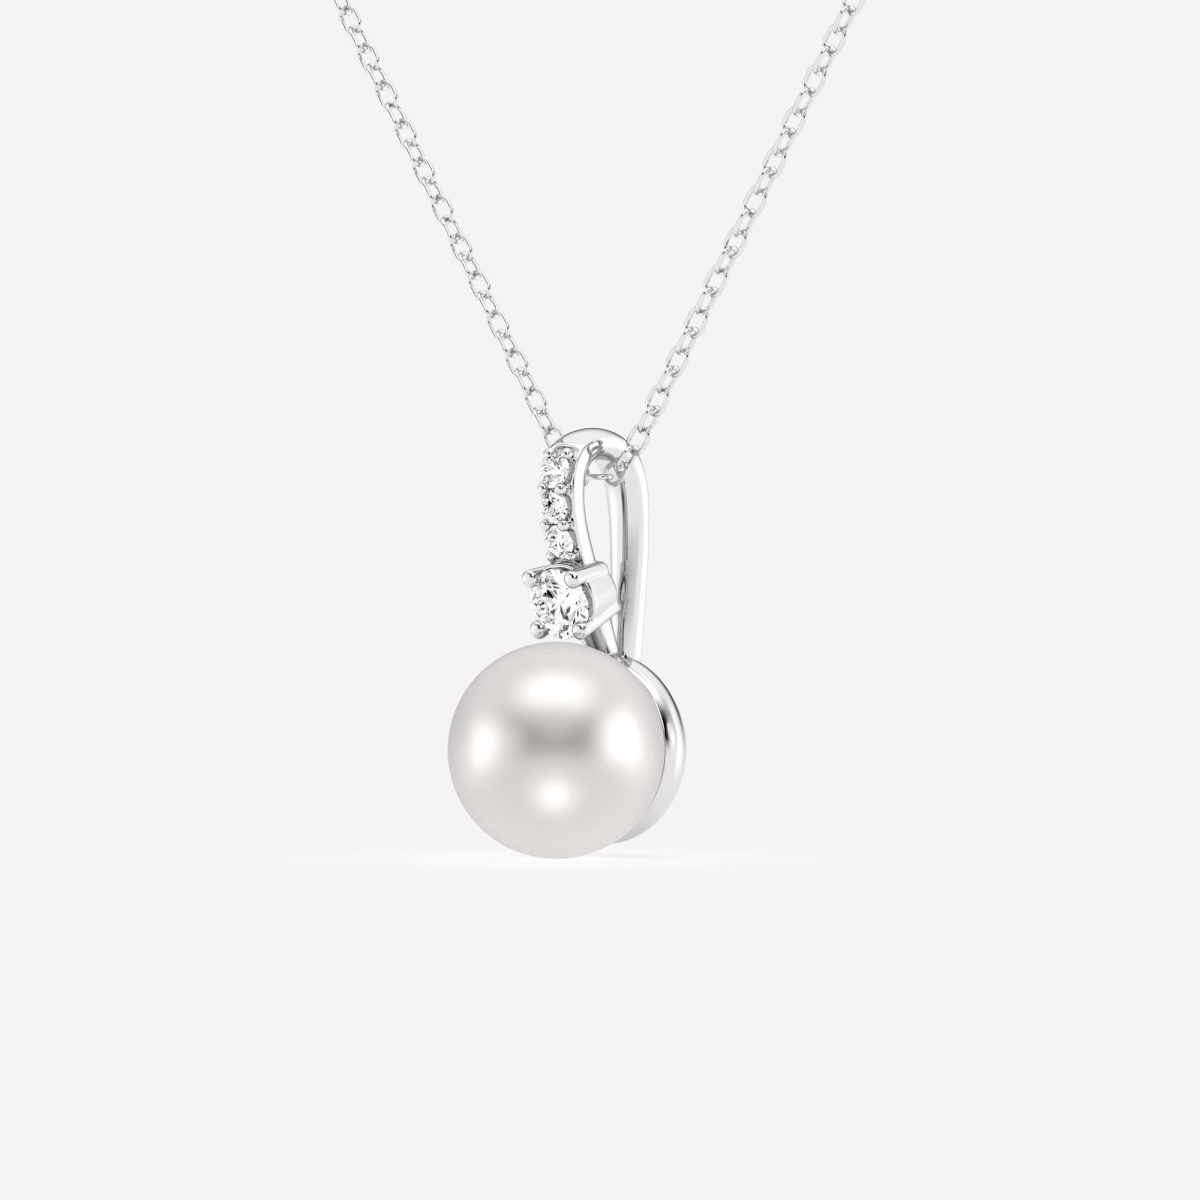 Additional Image 1 for  7.5 - 8.0 mm Cultured Freshwater Pearl and Lab Grown Diamond Accent Single Bail Fashion Pendant